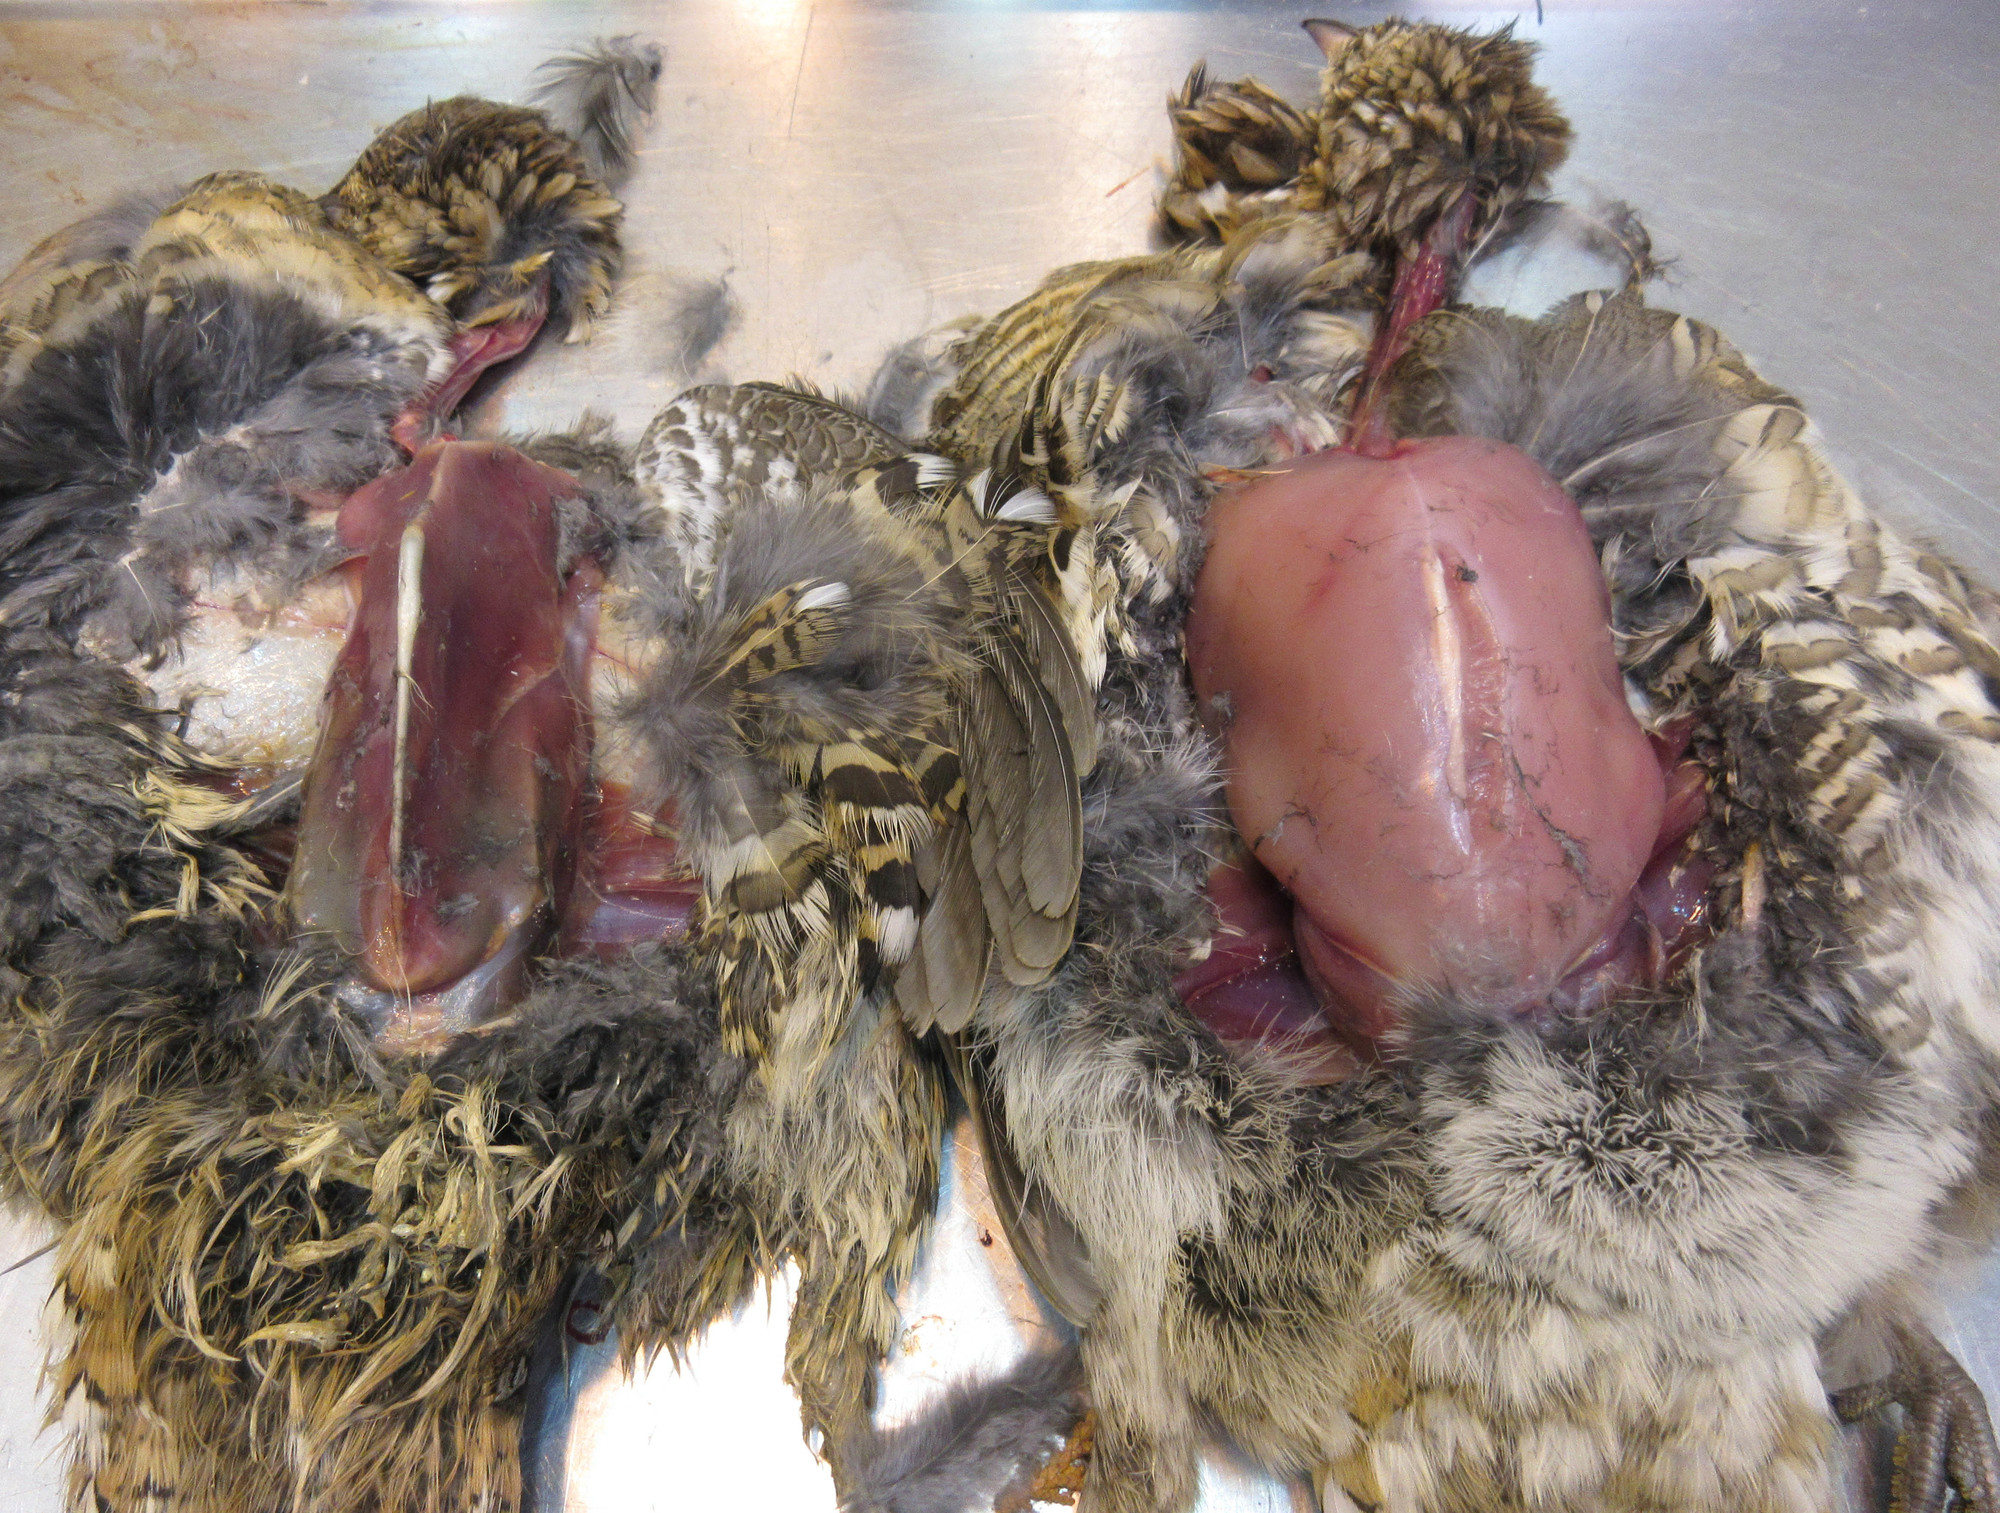 Two ruffed grouse tested for West Nile Virus are shown.